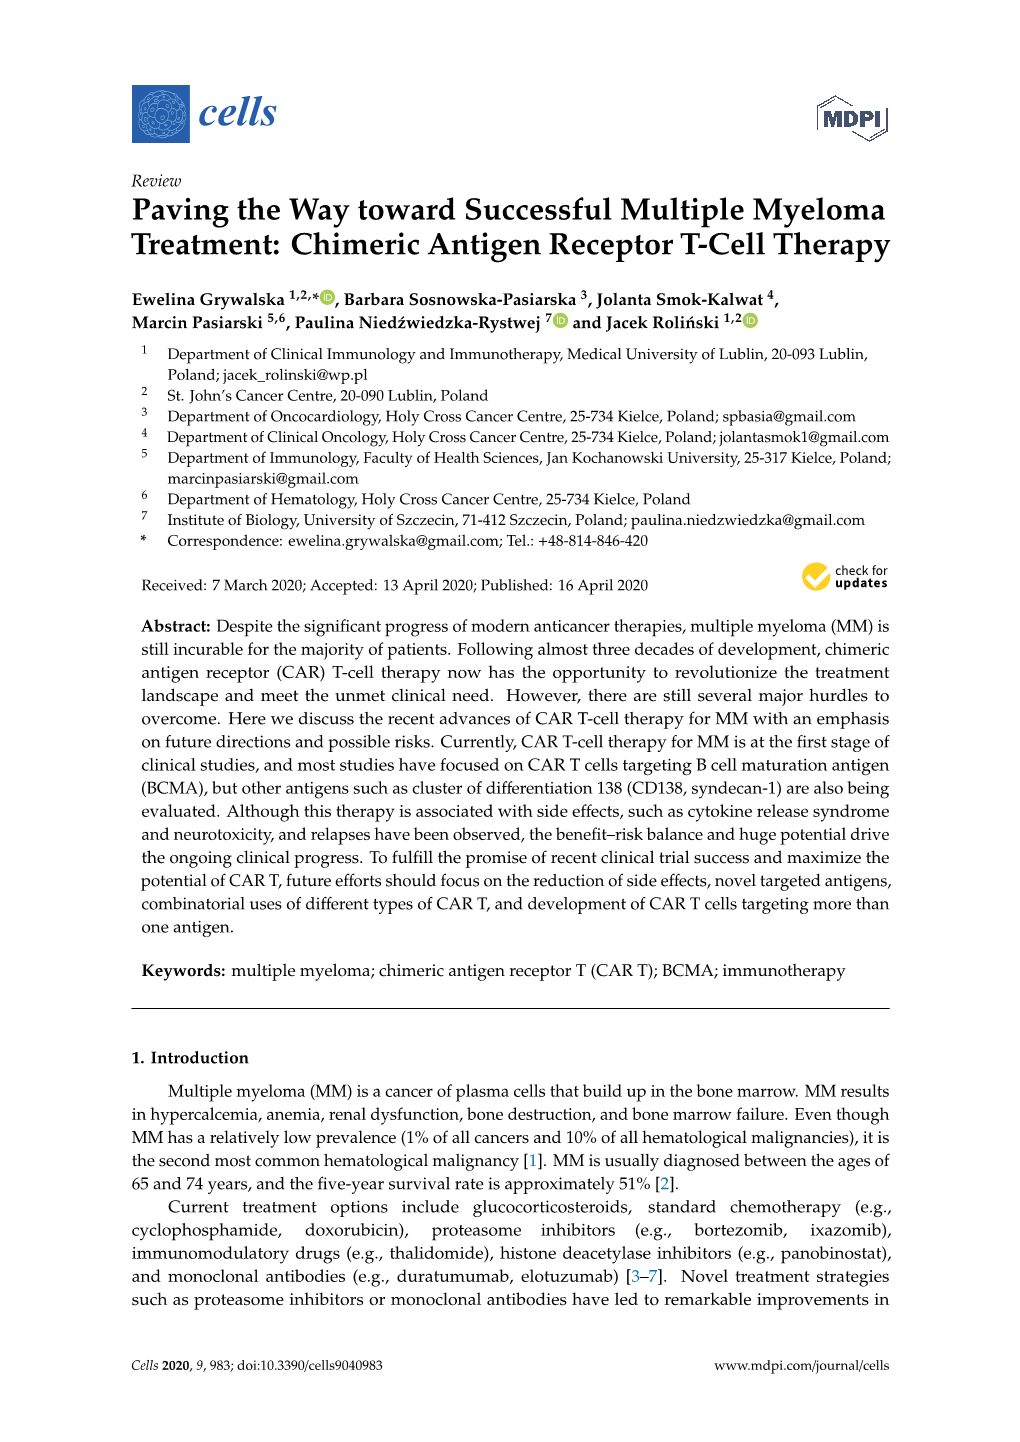 Chimeric Antigen Receptor T-Cell Therapy